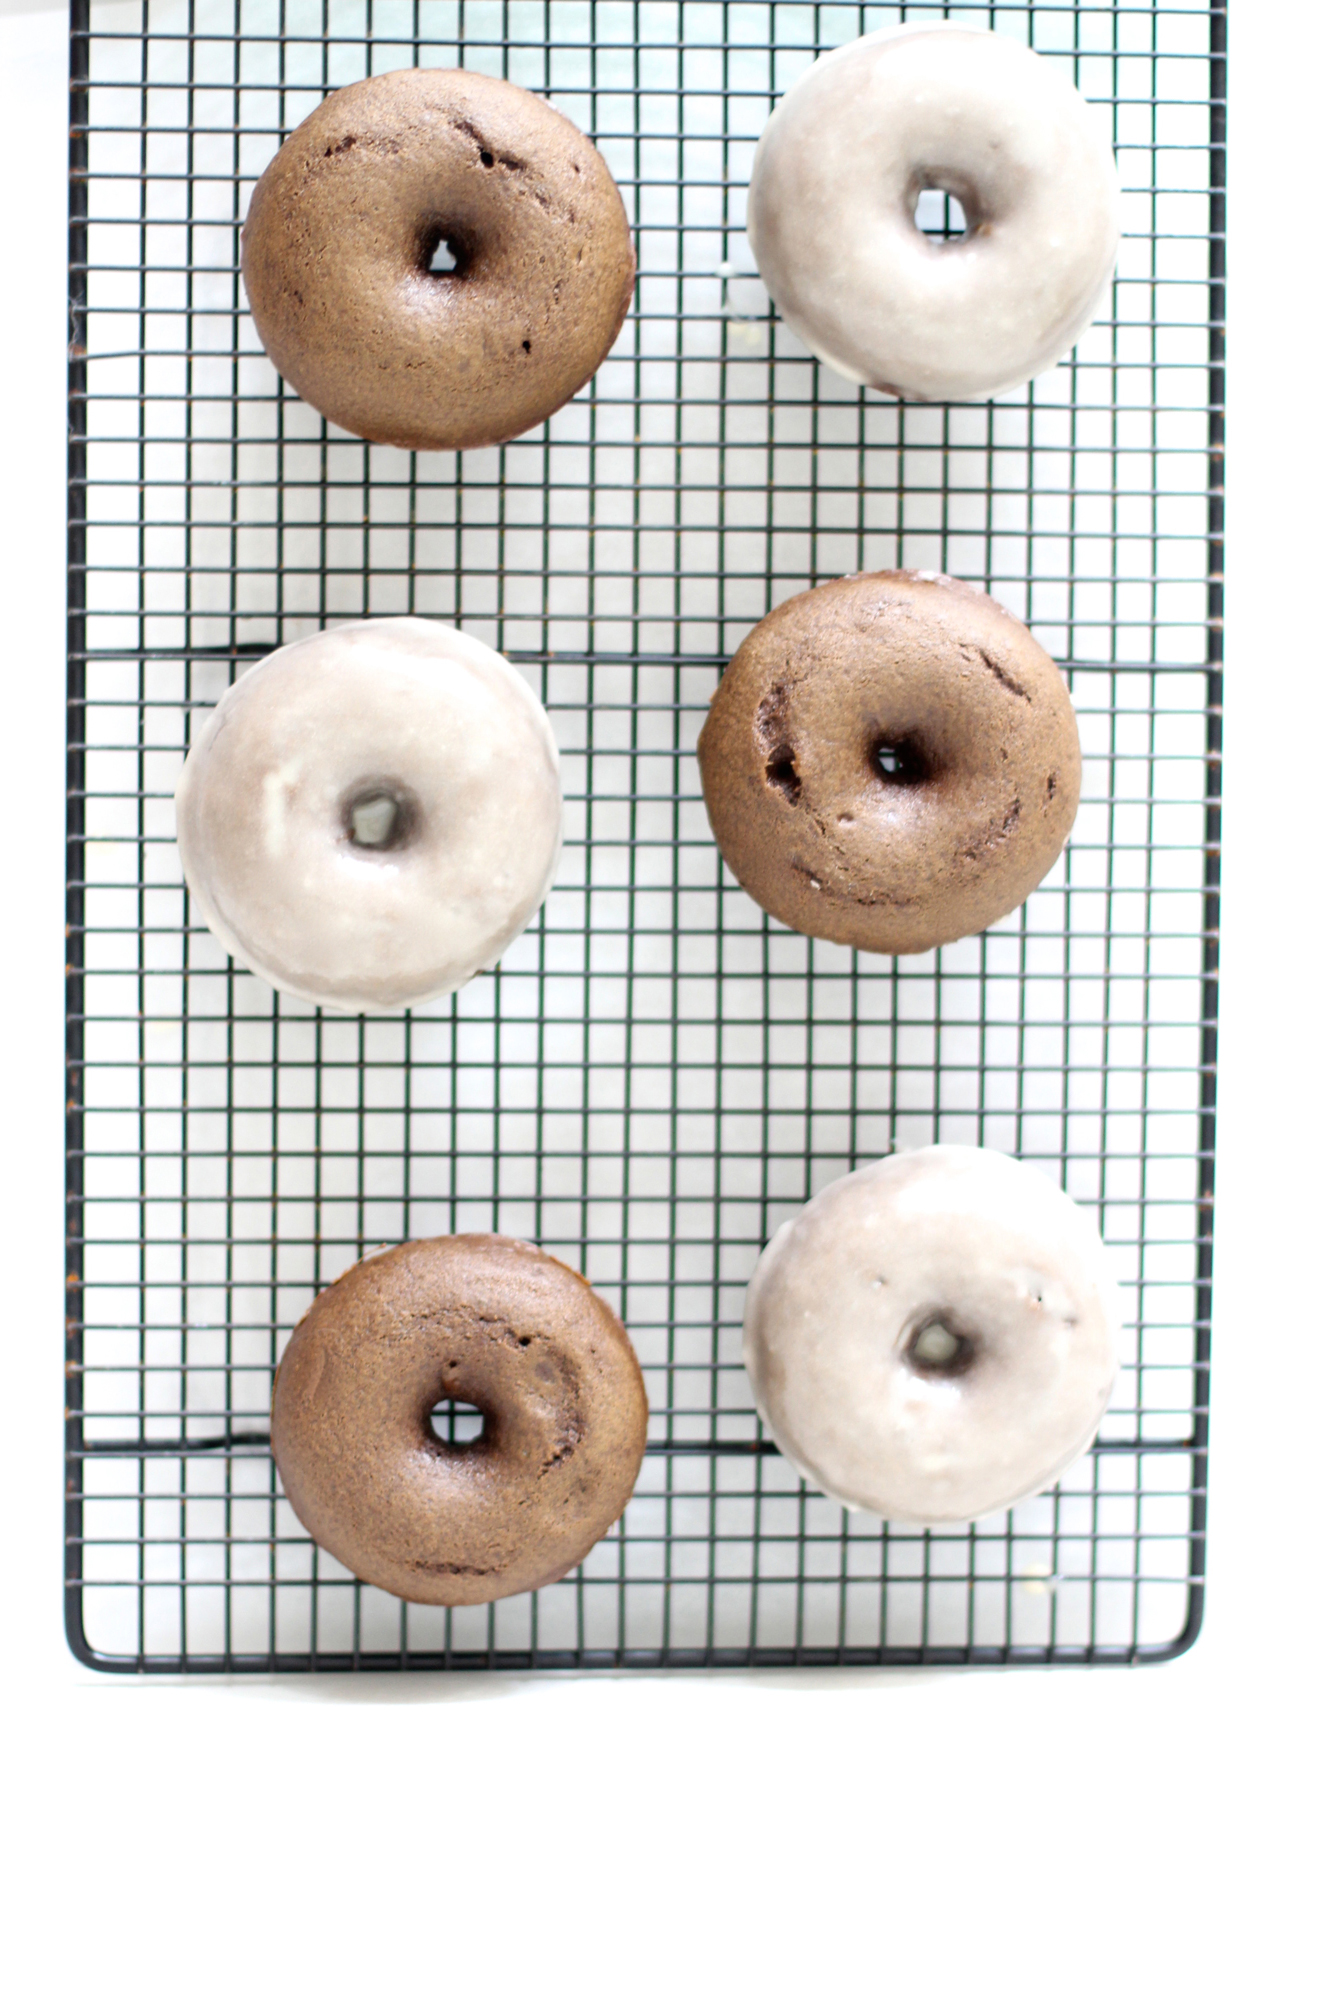 Hot Chocolate Donuts with Toasted Marshmallows (These are incredible! Just sayin'.)